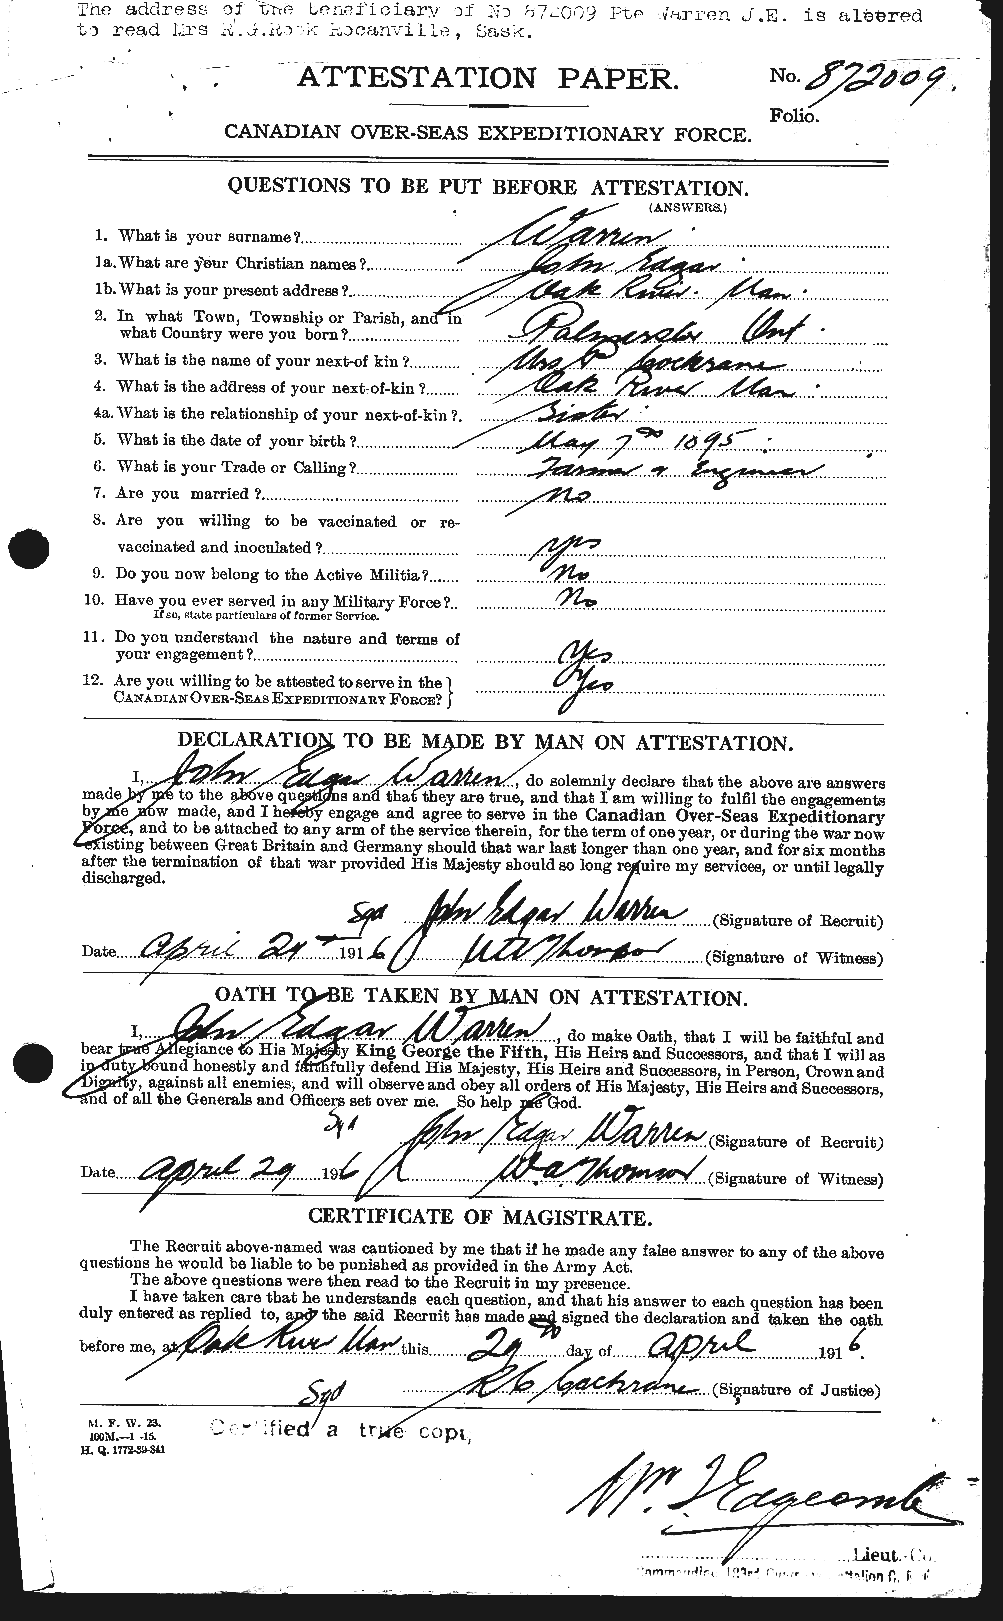 Personnel Records of the First World War - CEF 658550a